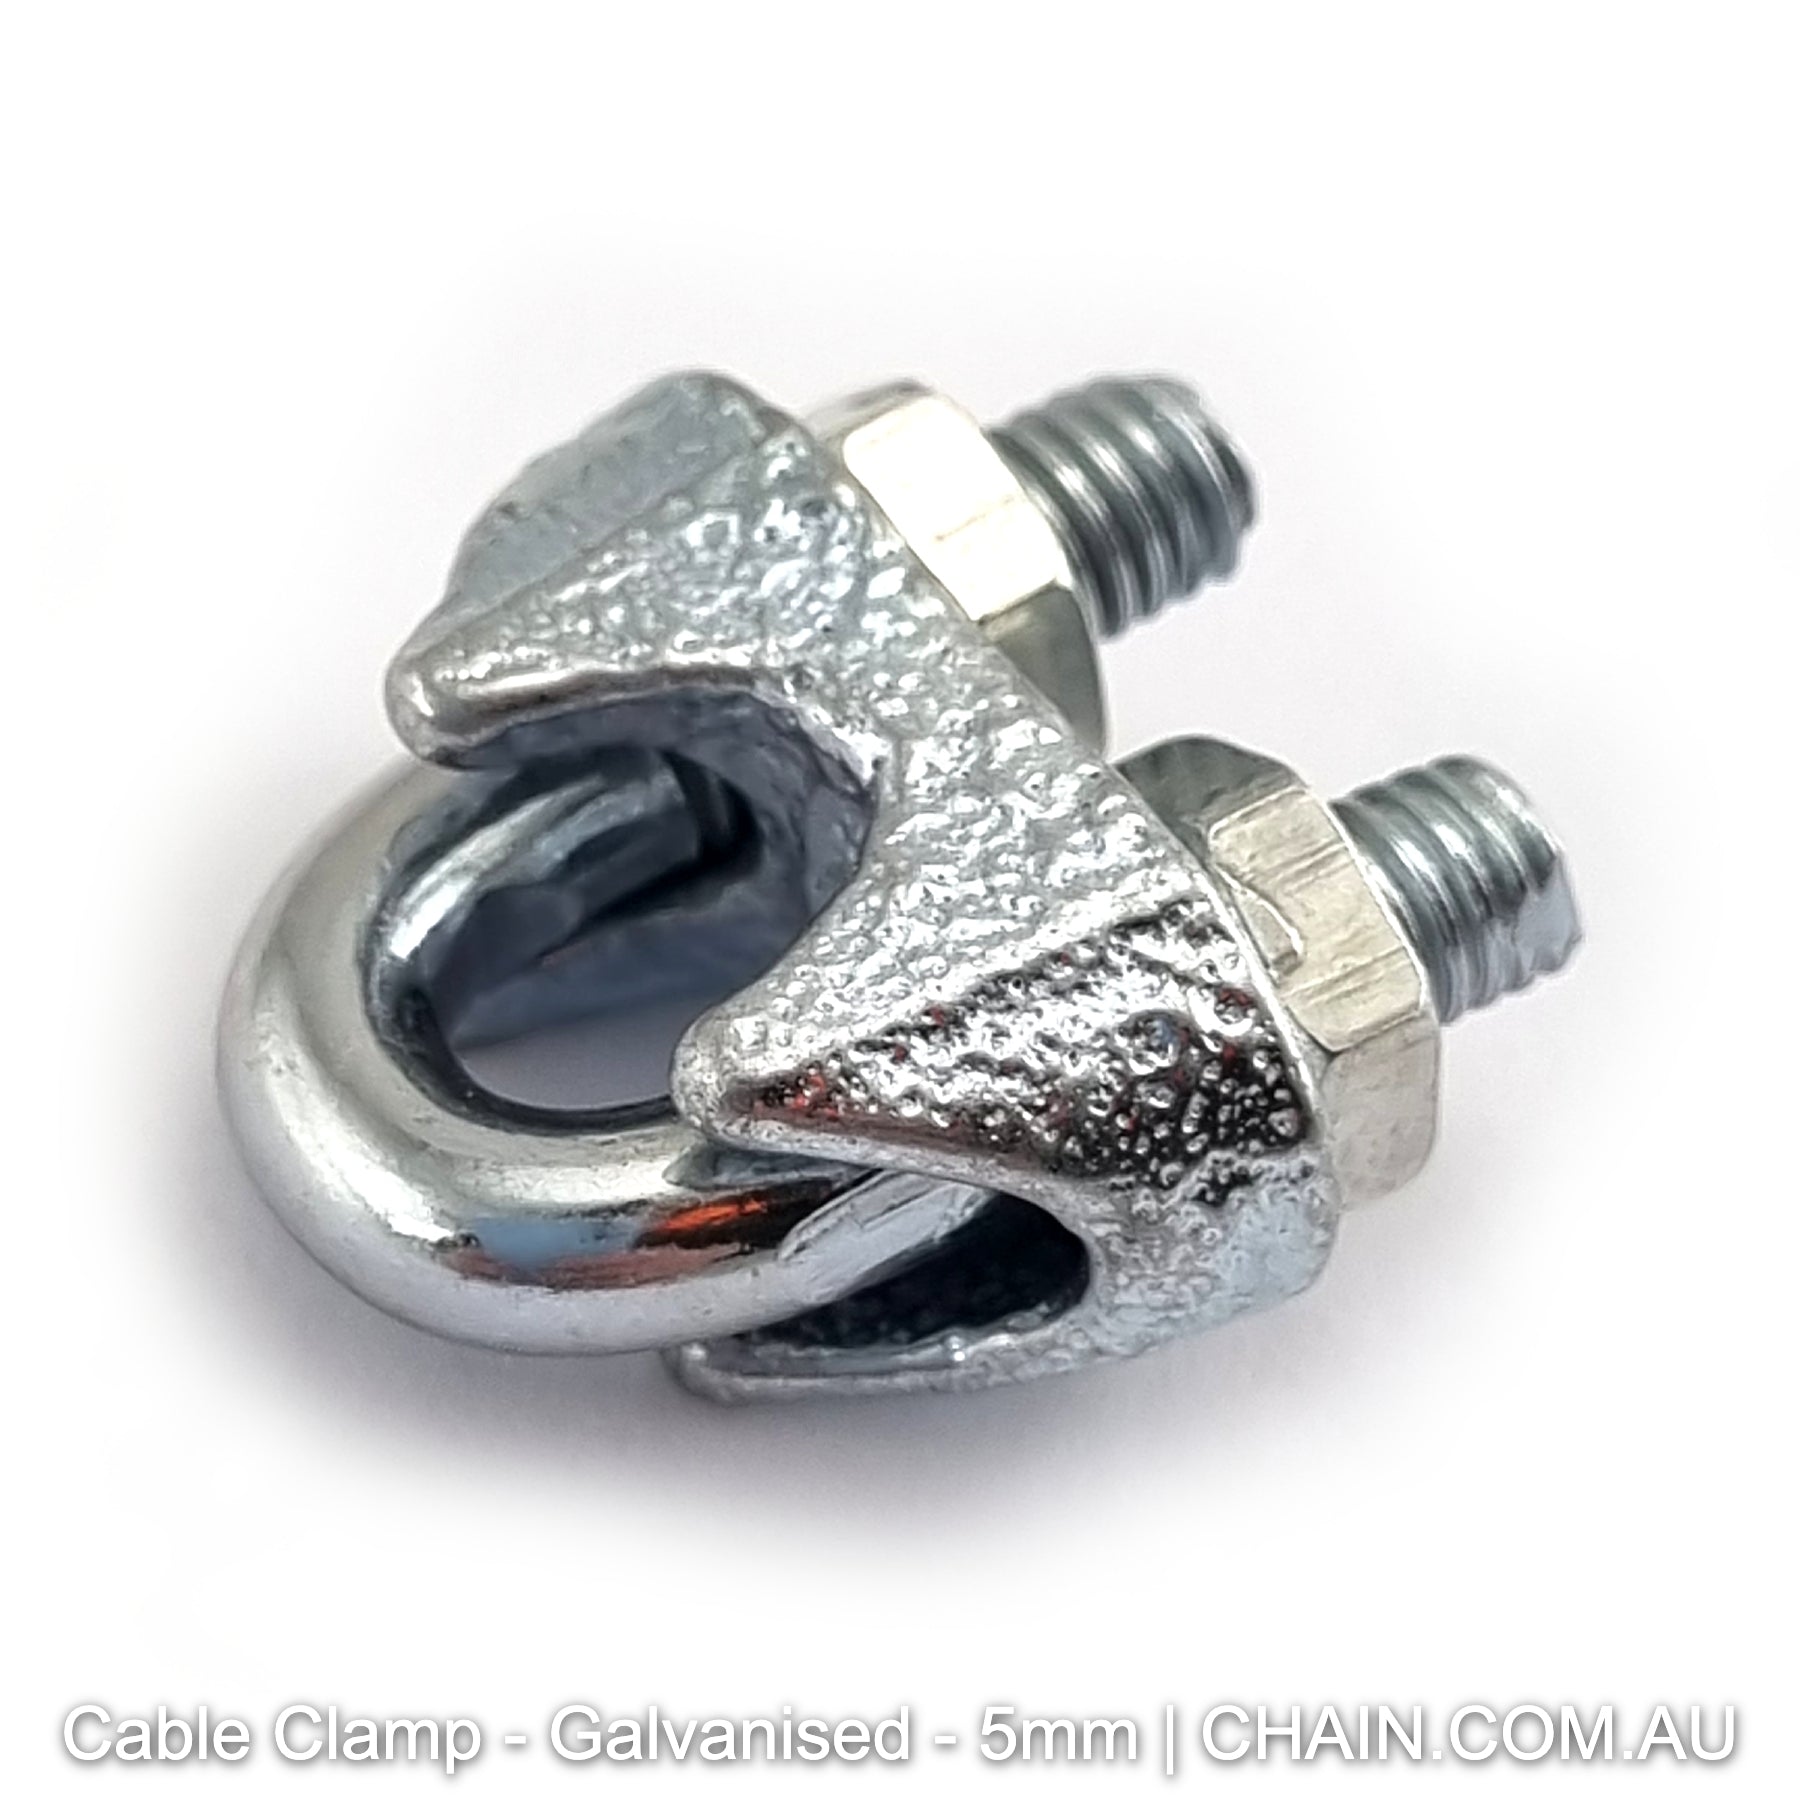 Galvanised cable clamp size 5mm. Shop balustrade supplies and hardware online. Australia wide shipping. Chain.com.au